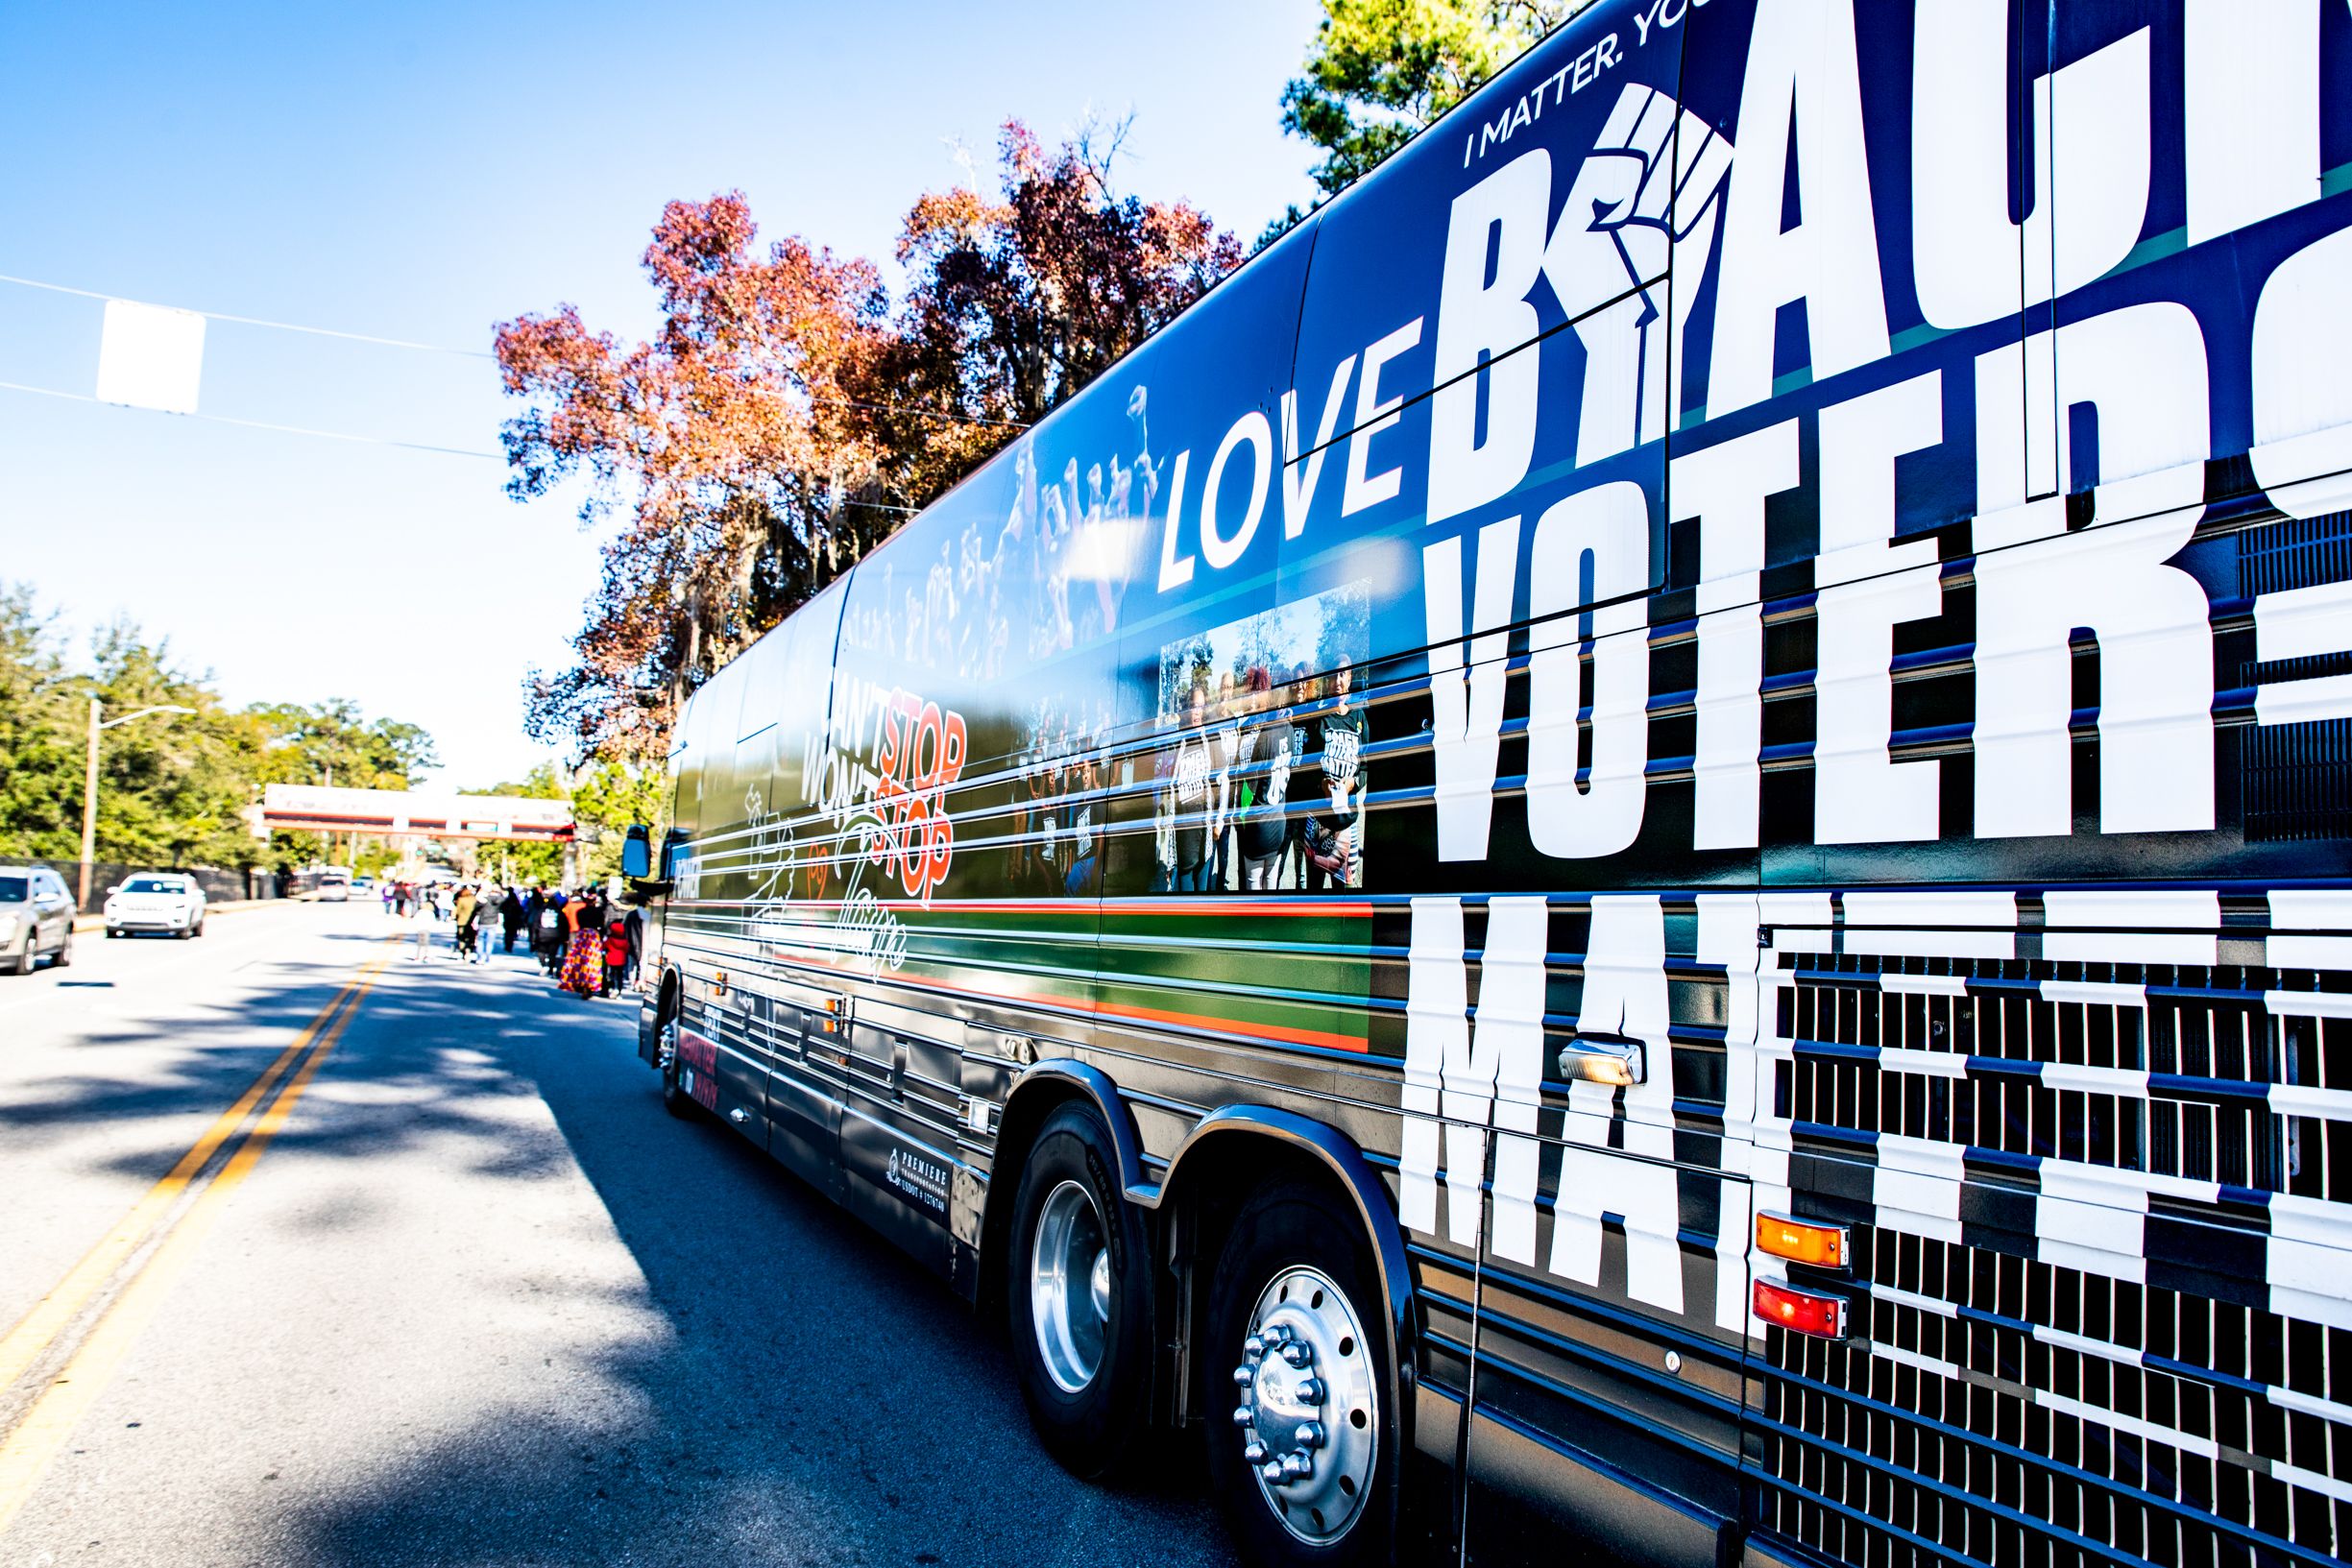 Black Voters Matter Announces New Voter Outreach Initiative on 60th Anniversary Of The Original Freedom Rides